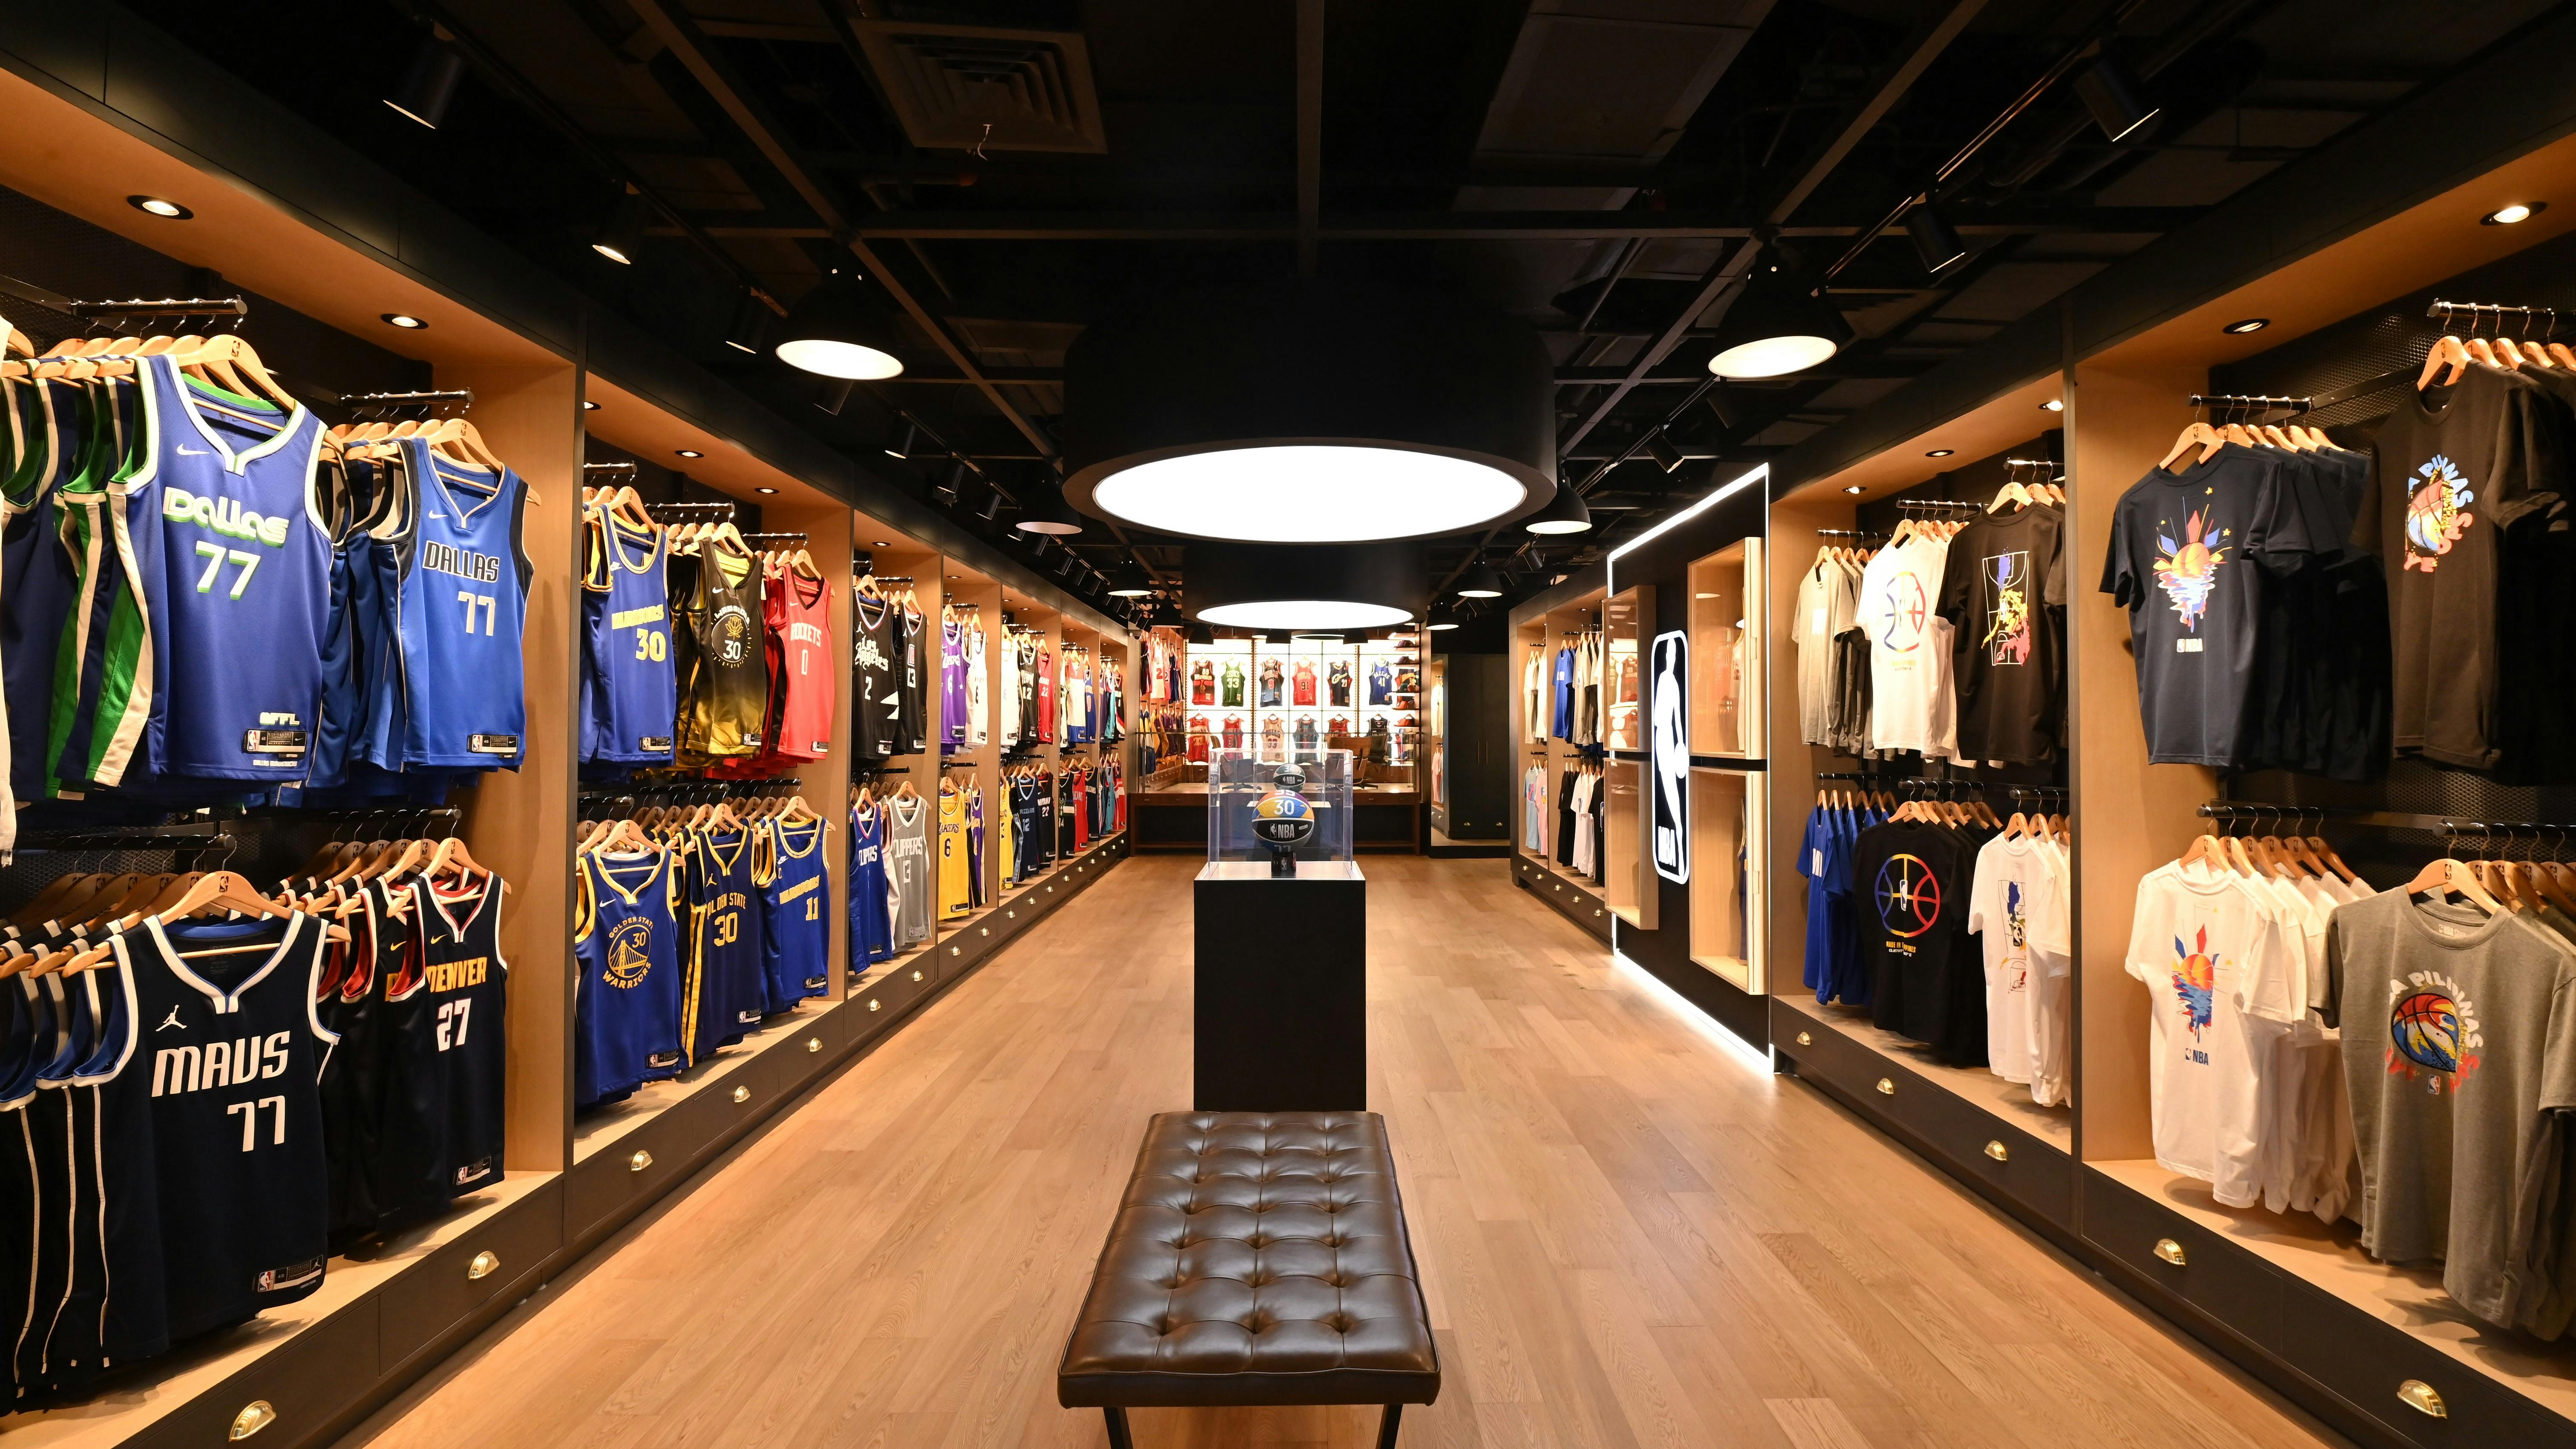 Basketball budol: Largest NBA Store in the Philippines set to open this May